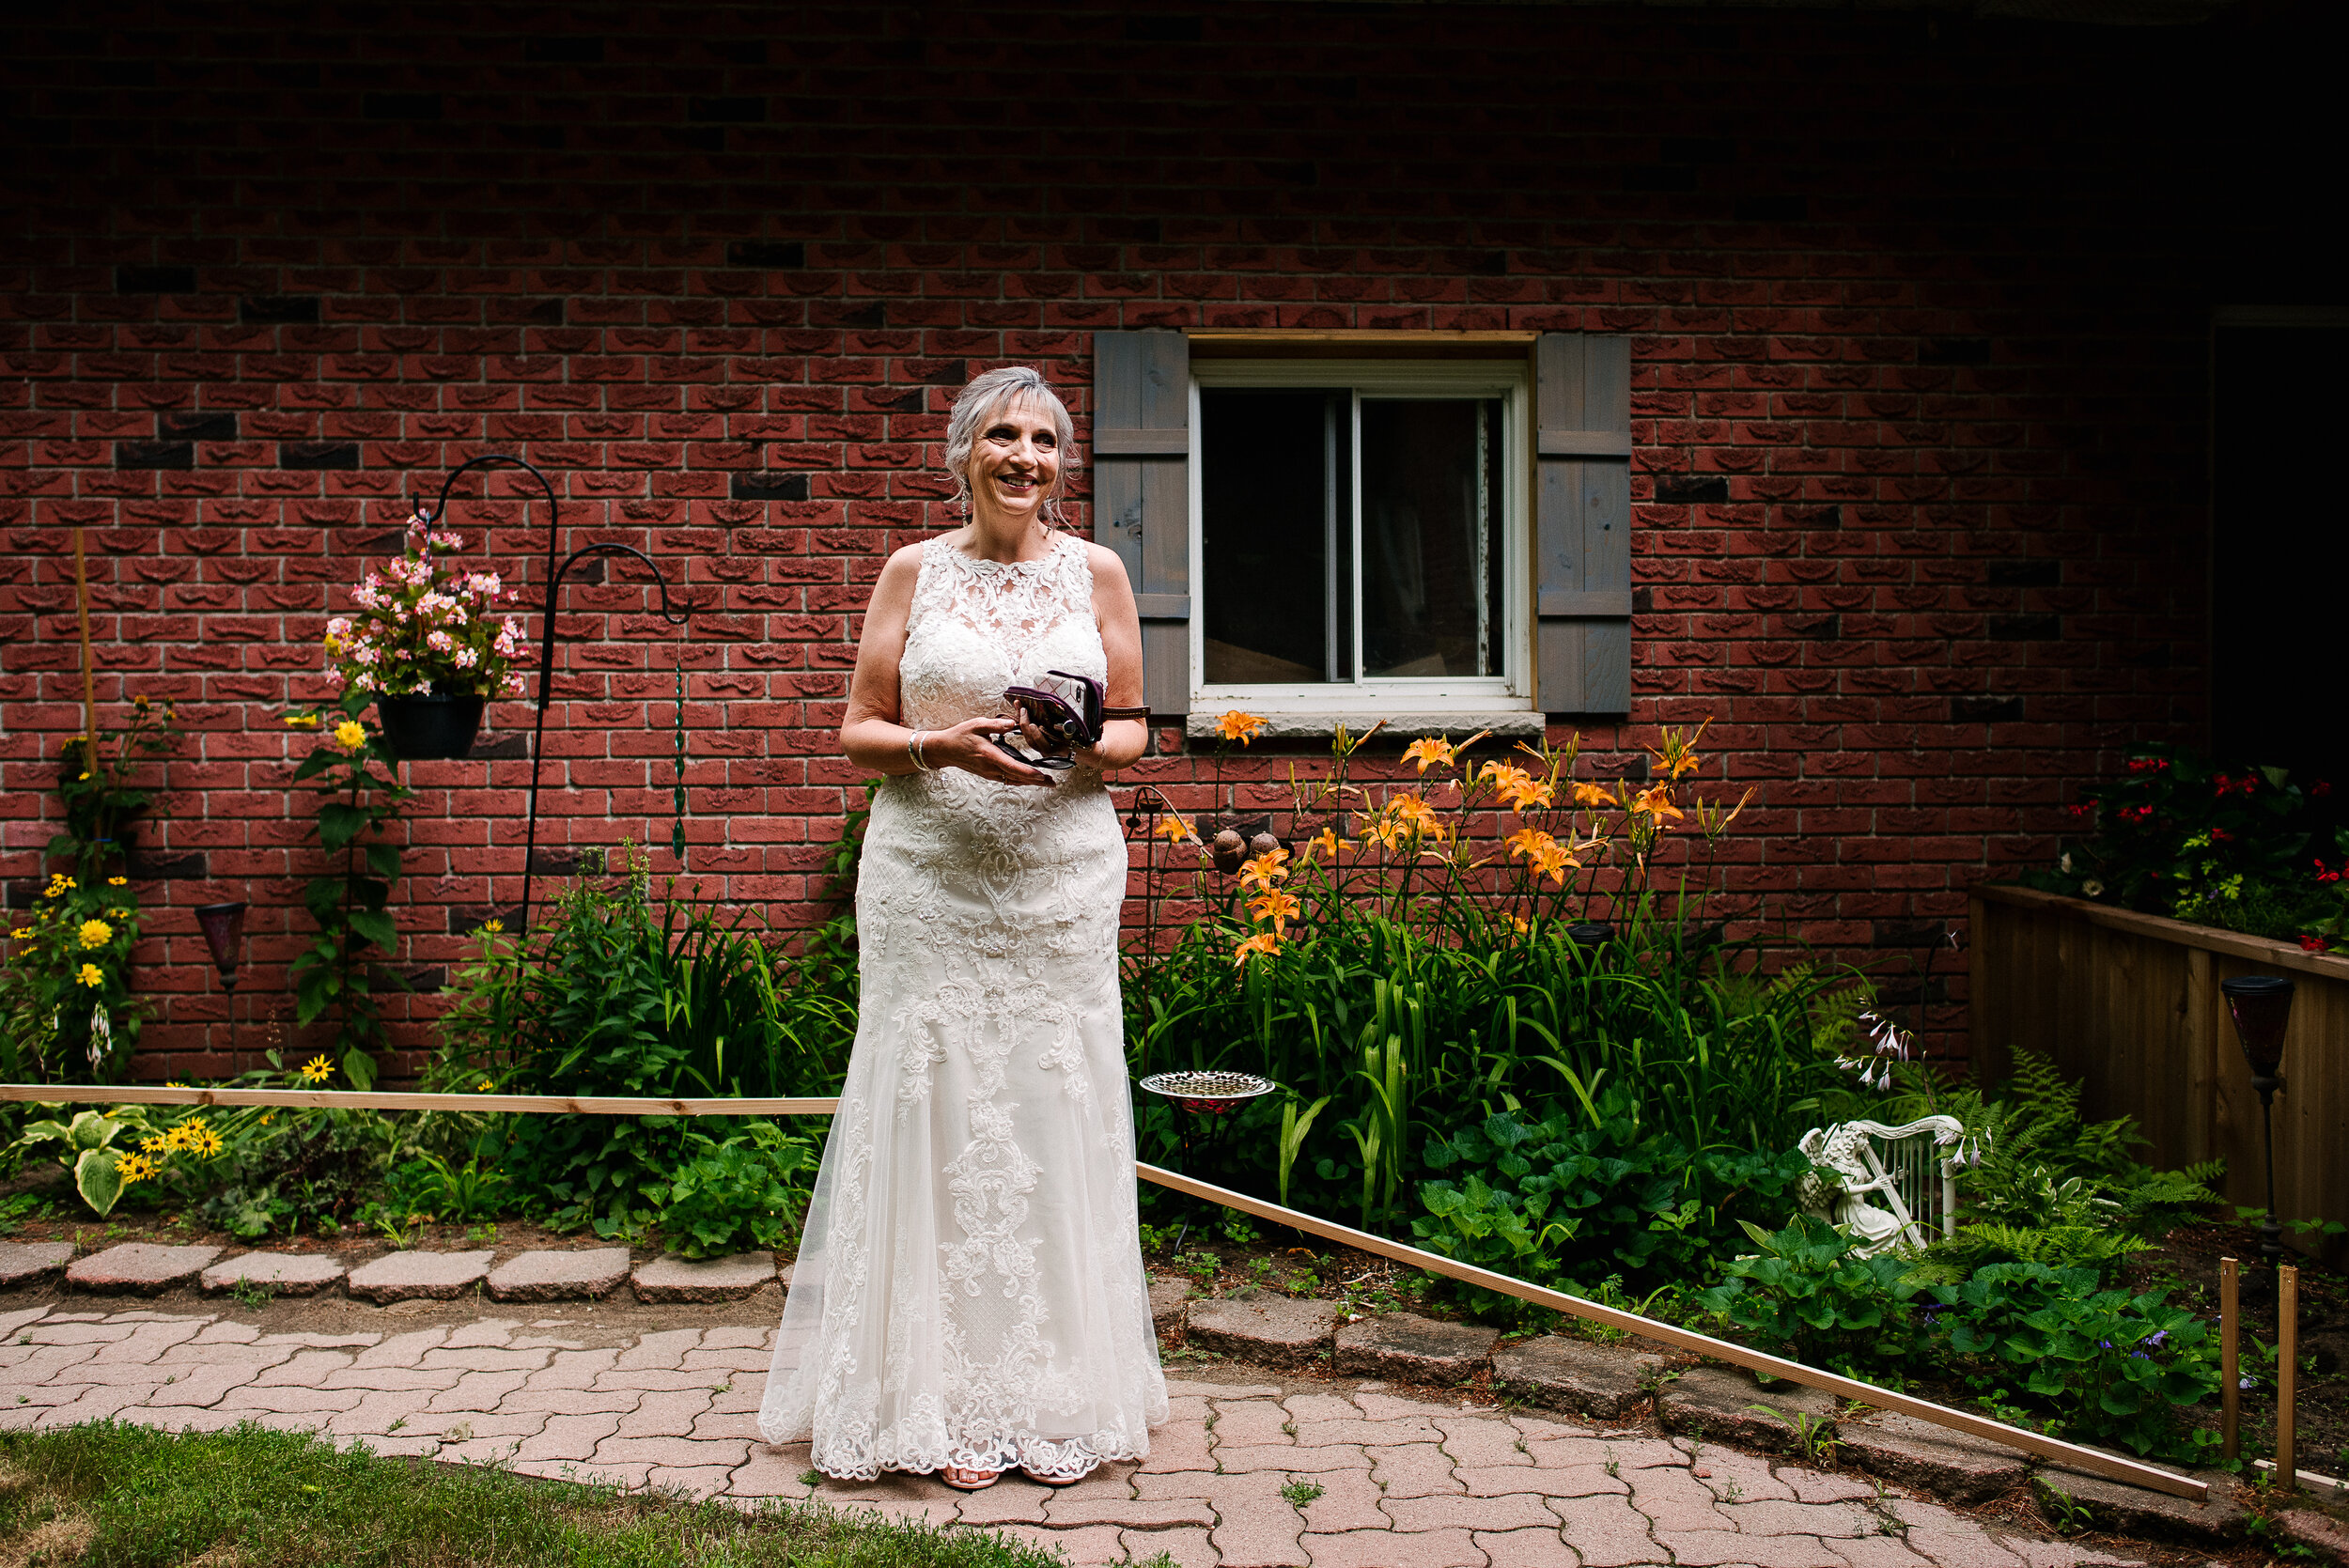 Bride getting ready to walk down the aisle in Verona Ontario